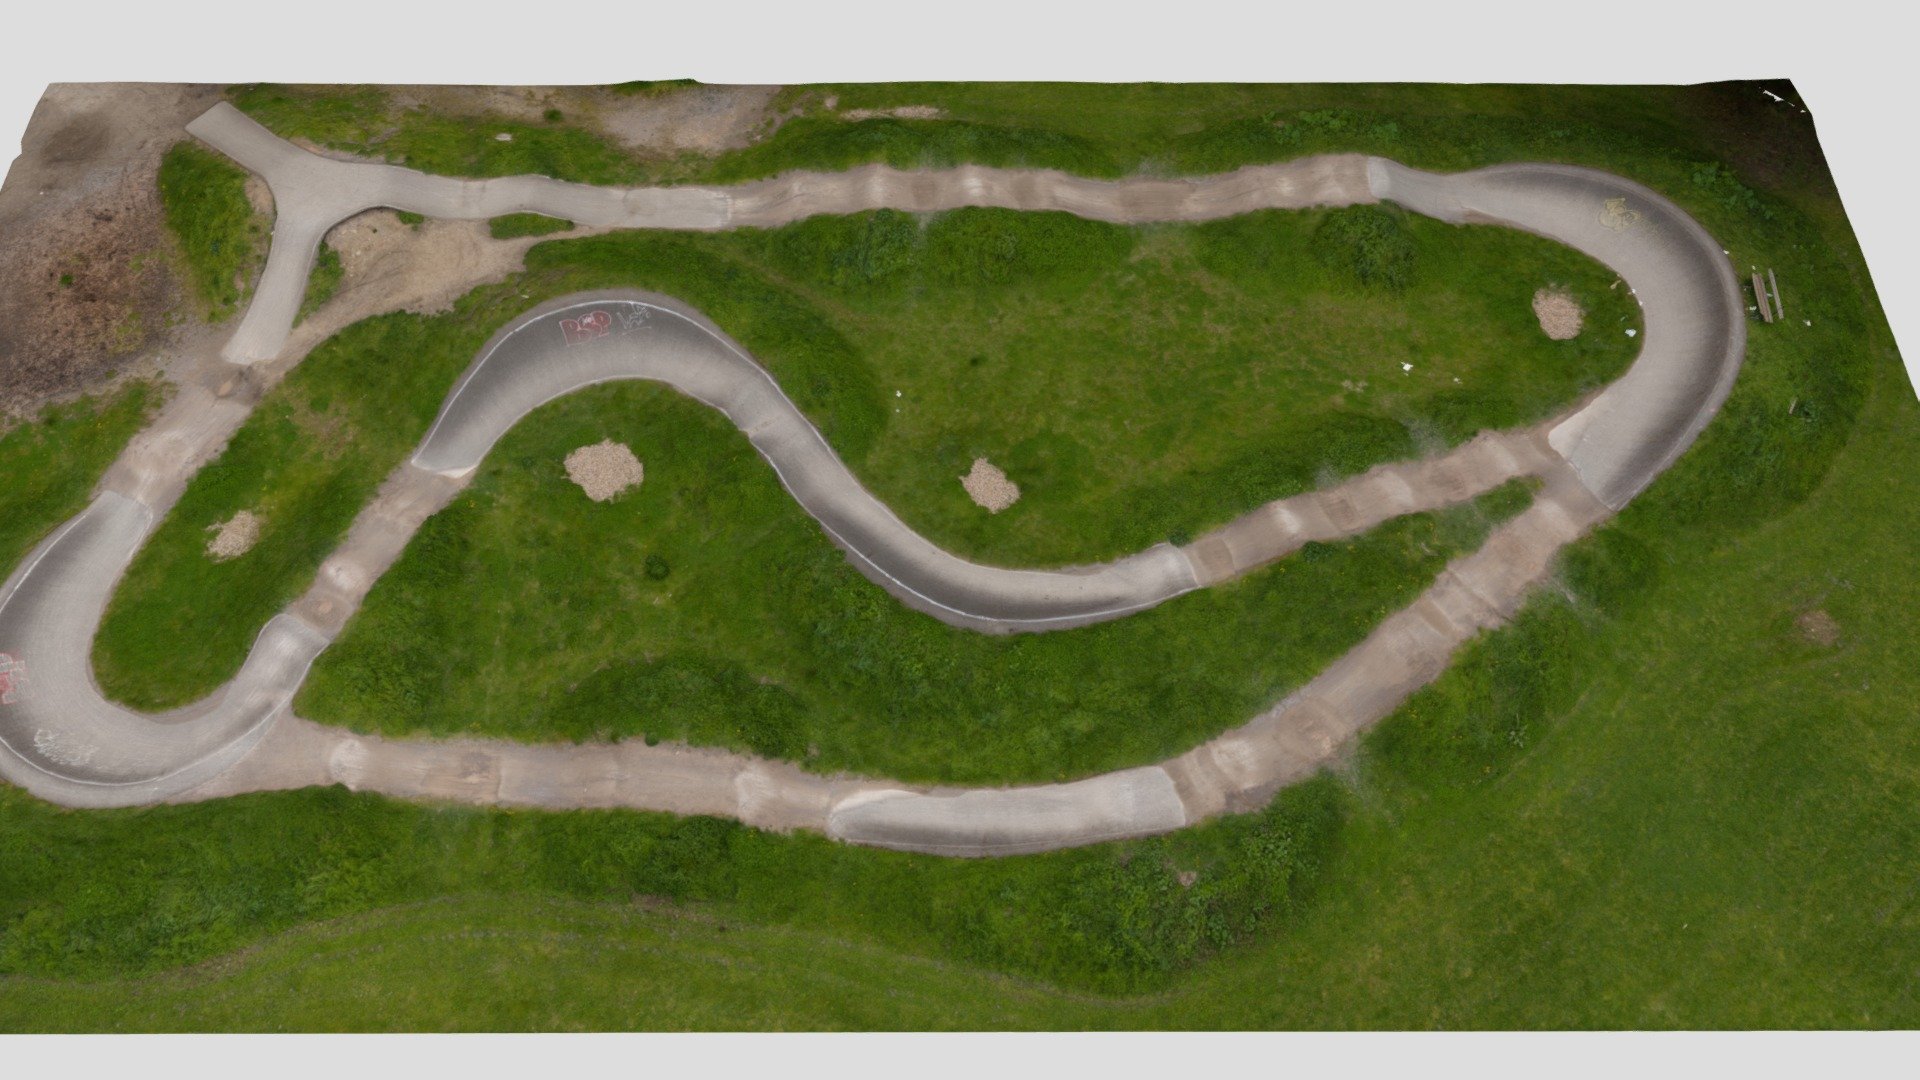 Photogrammetry Scan of a BMX track in South London.

To ensure colour accuracy the Raw Photography was profiled with X-Rite ColorChecker and a unique profile created for sRGB Colour Gamut in Lightroom. 
Scale bar has been applied so photogrammetry is correctly scaled. Lods have been cleaned up to remove floating polygons and close holes (where possible)
Note there are 2 diffuse maps with this package. The first diffuse map texture is the original photography. The second map is called diffuse_3 and are delit for re-lighting so you have both options available to you.




https://youtu.be/cEaVye9scN8

Package includes 4 LODs with 




1 million Polygon FBX model with 8k x6 UDIM Diffuse, Diffuse_3 Texture Maps and Normal Maps 

500k Polygon FBX model with 8k x6 UDIM Diffuse, Diffuse_3 Texture Maps and Normal Maps

200k Polygon FBX model with 8k x4 UDIM Diffuse, Diffuse_3 Texture Maps and Normal Maps 

50k Polygon FBX model with 8k x4 UDIM Diffuse, Diffuse_3 Texture Maps and Normal Maps
 - BMX Track - Buy Royalty Free 3D model by Kieron Helsdon (@ronski) 3d model